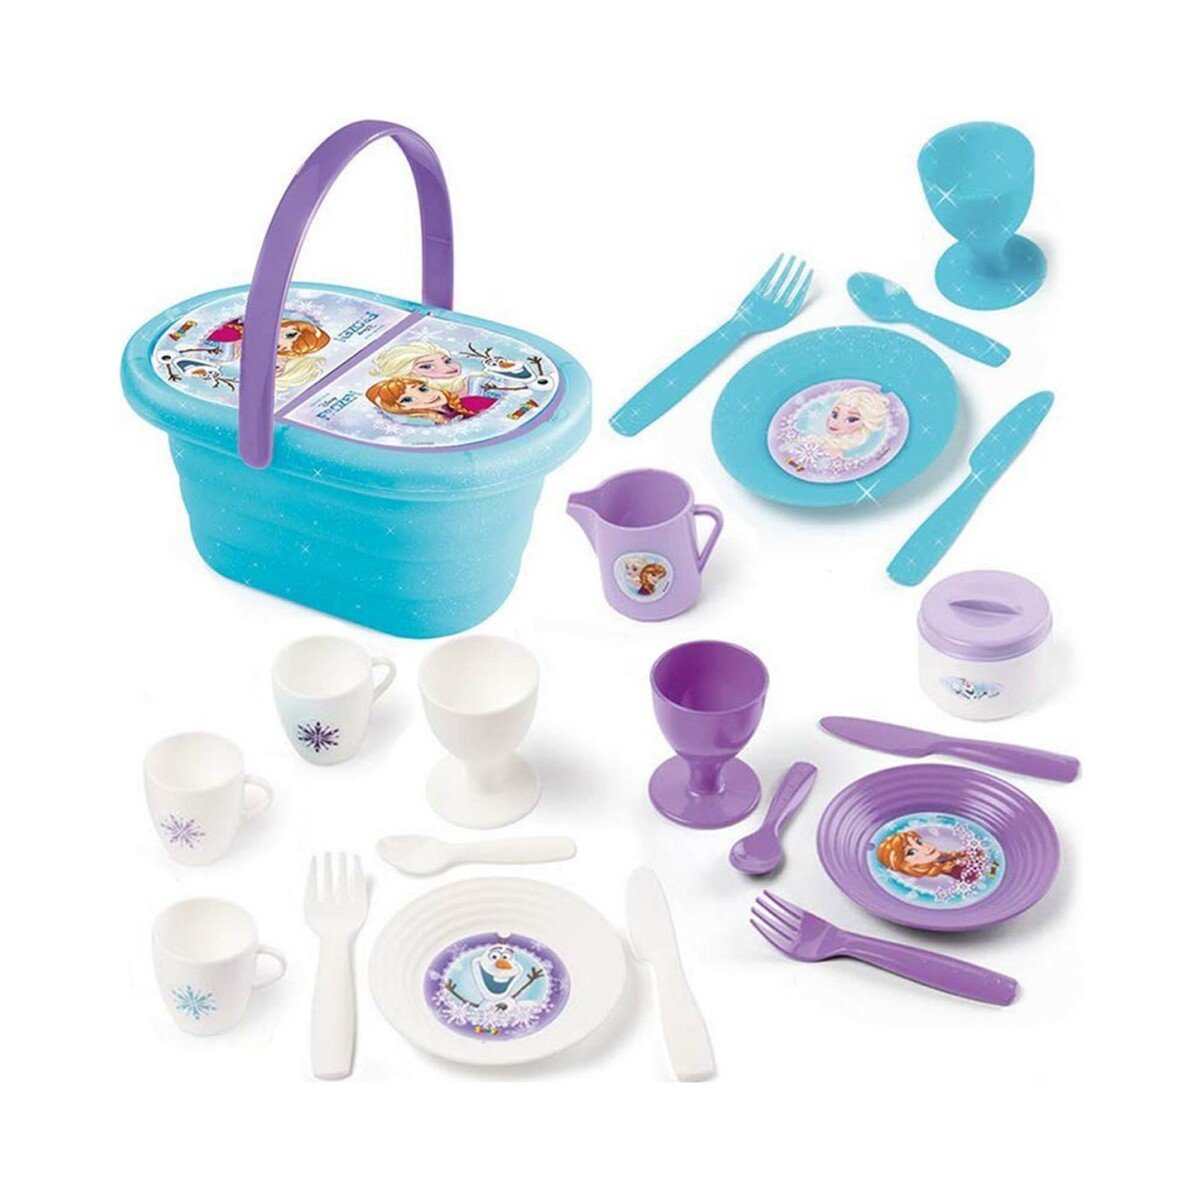 Smoby Frozen Picnic Basket With Accessories 310578